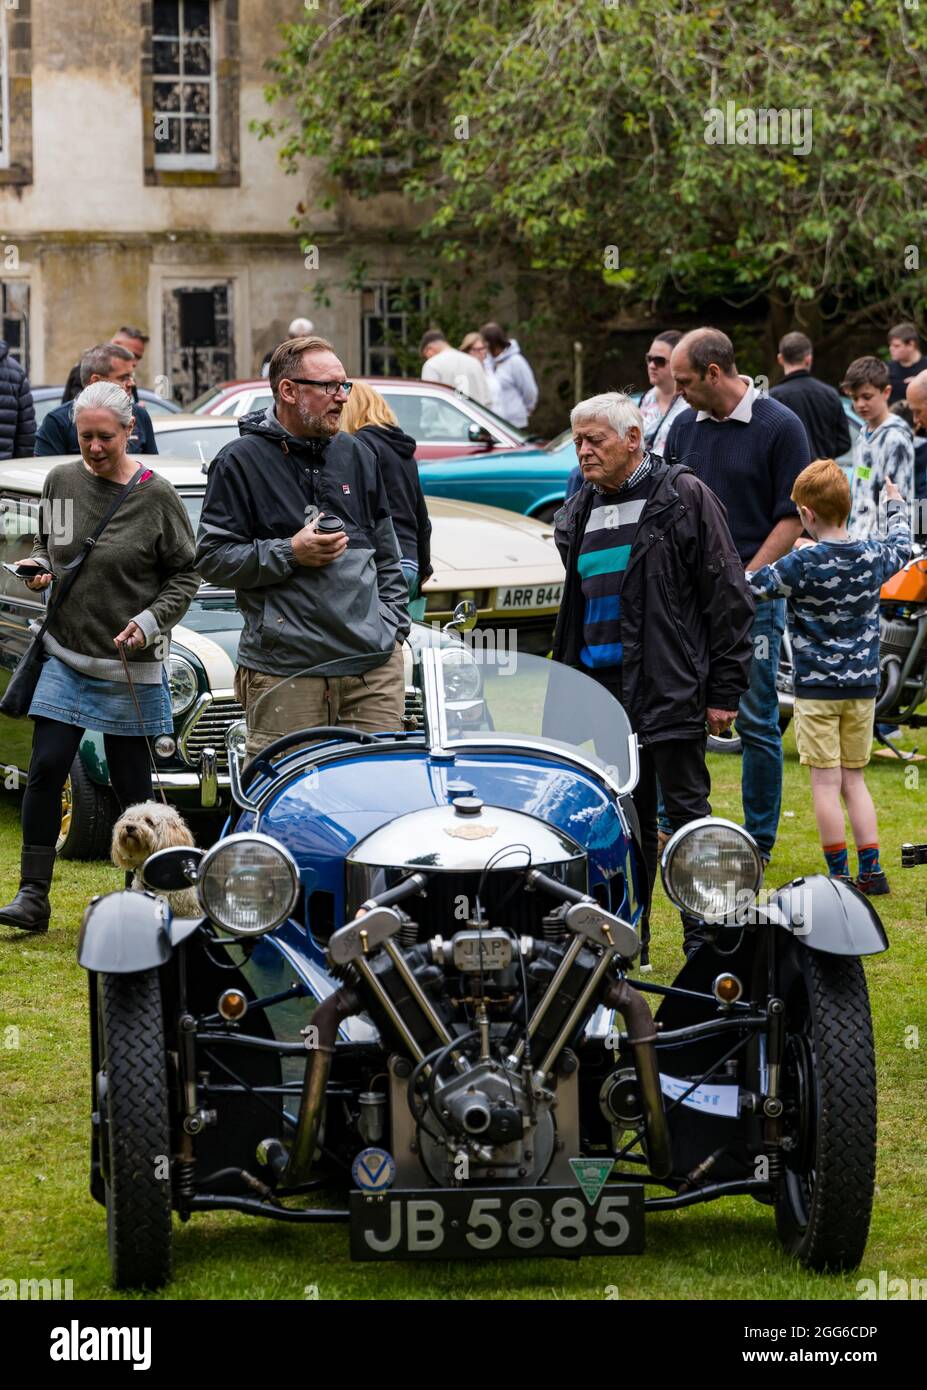 Newhailes, Musselburgh, East Lothian, Scotland, UK, 29th August 2021. Class car rally: an outdoor event takes place called Carhailes, with vintage cars on display. Pictured: Enthusiasts discuss their cars with a 1934 Morgan car Stock Photo